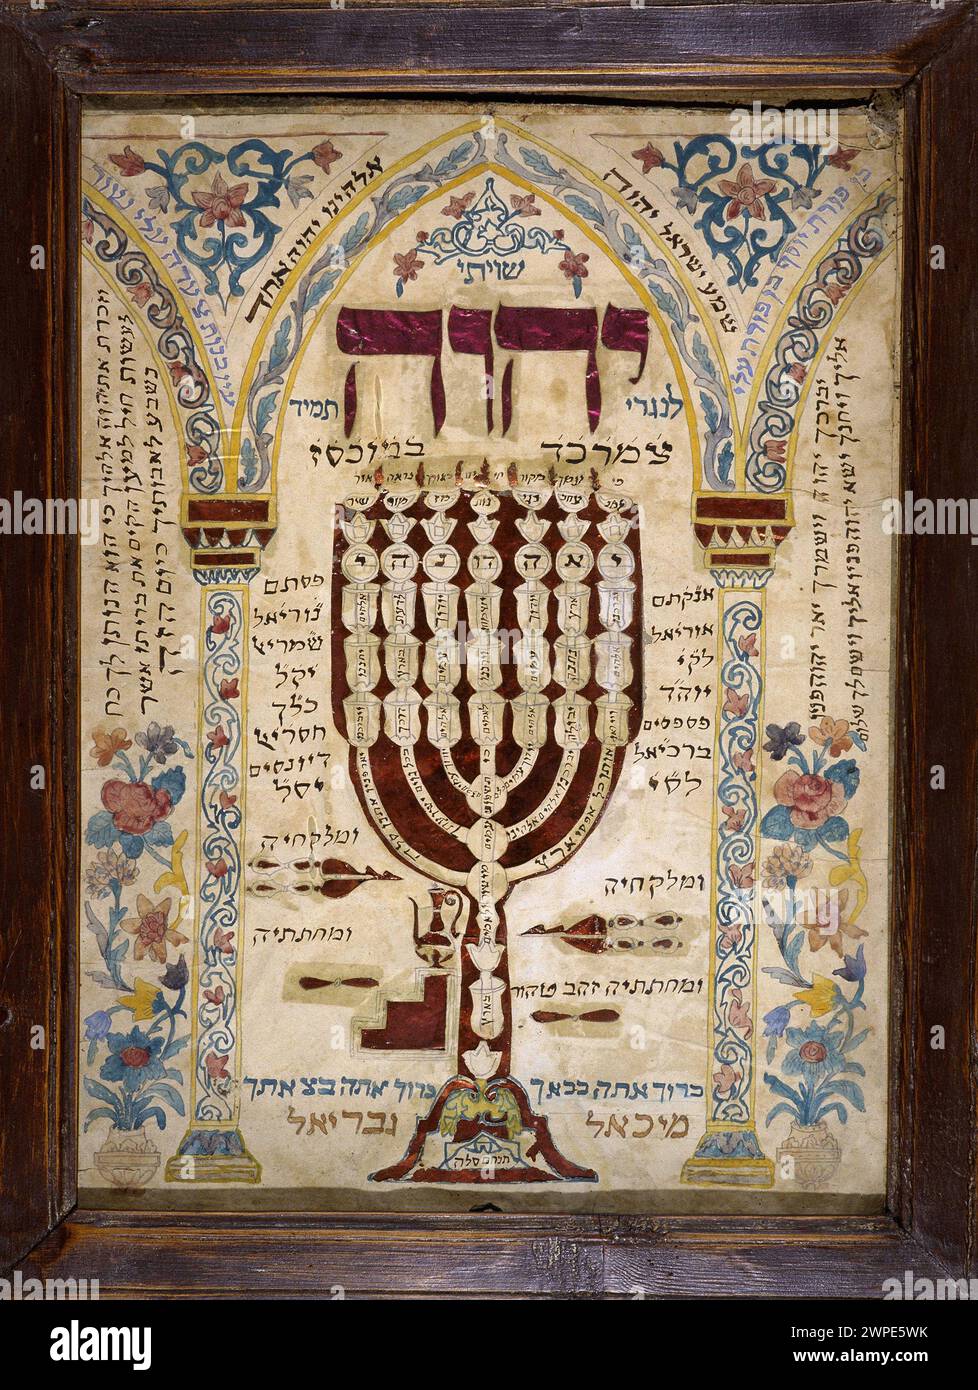 Alsatian misrach indicating the direction to Jerusalem in Jewish houses and representing the Menorah or Menorah (seven-branched candlestick). Museum o Stock Photo